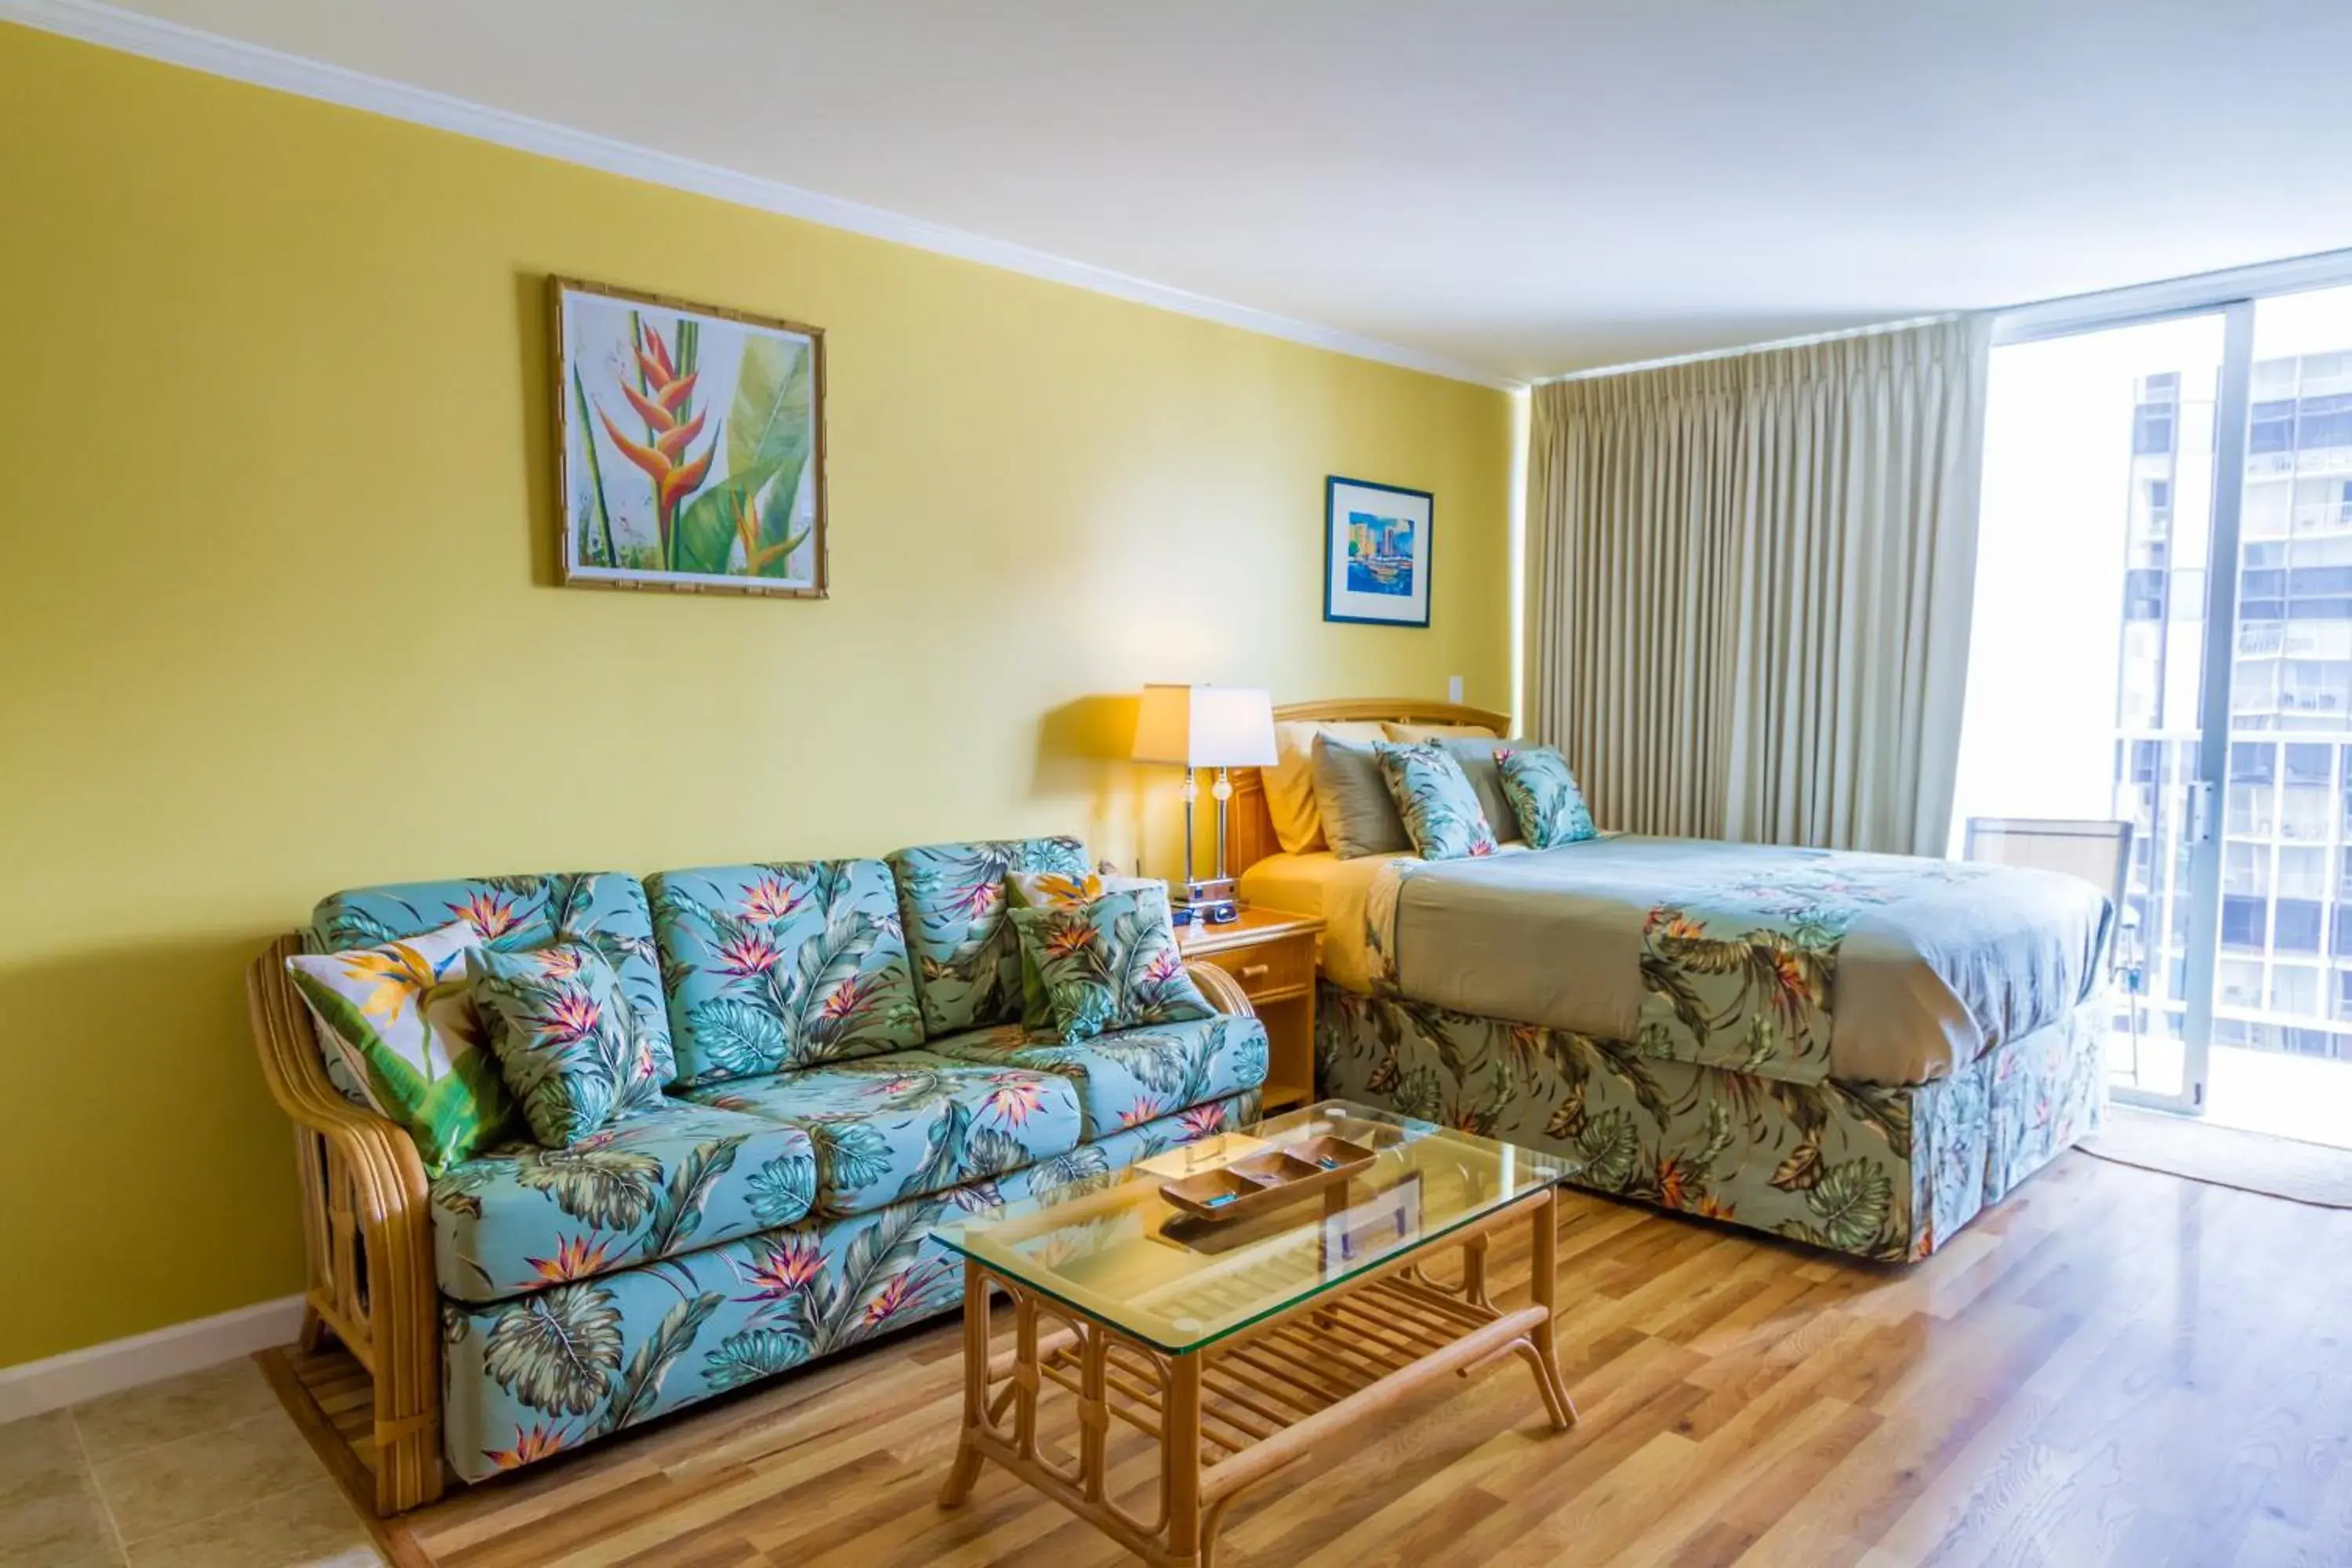 Day in Tropical Studios at Marine Surf Waikiki - FREE PARKING - BEST LOCATION - FULL KITCHEN - SWIMMING POOL